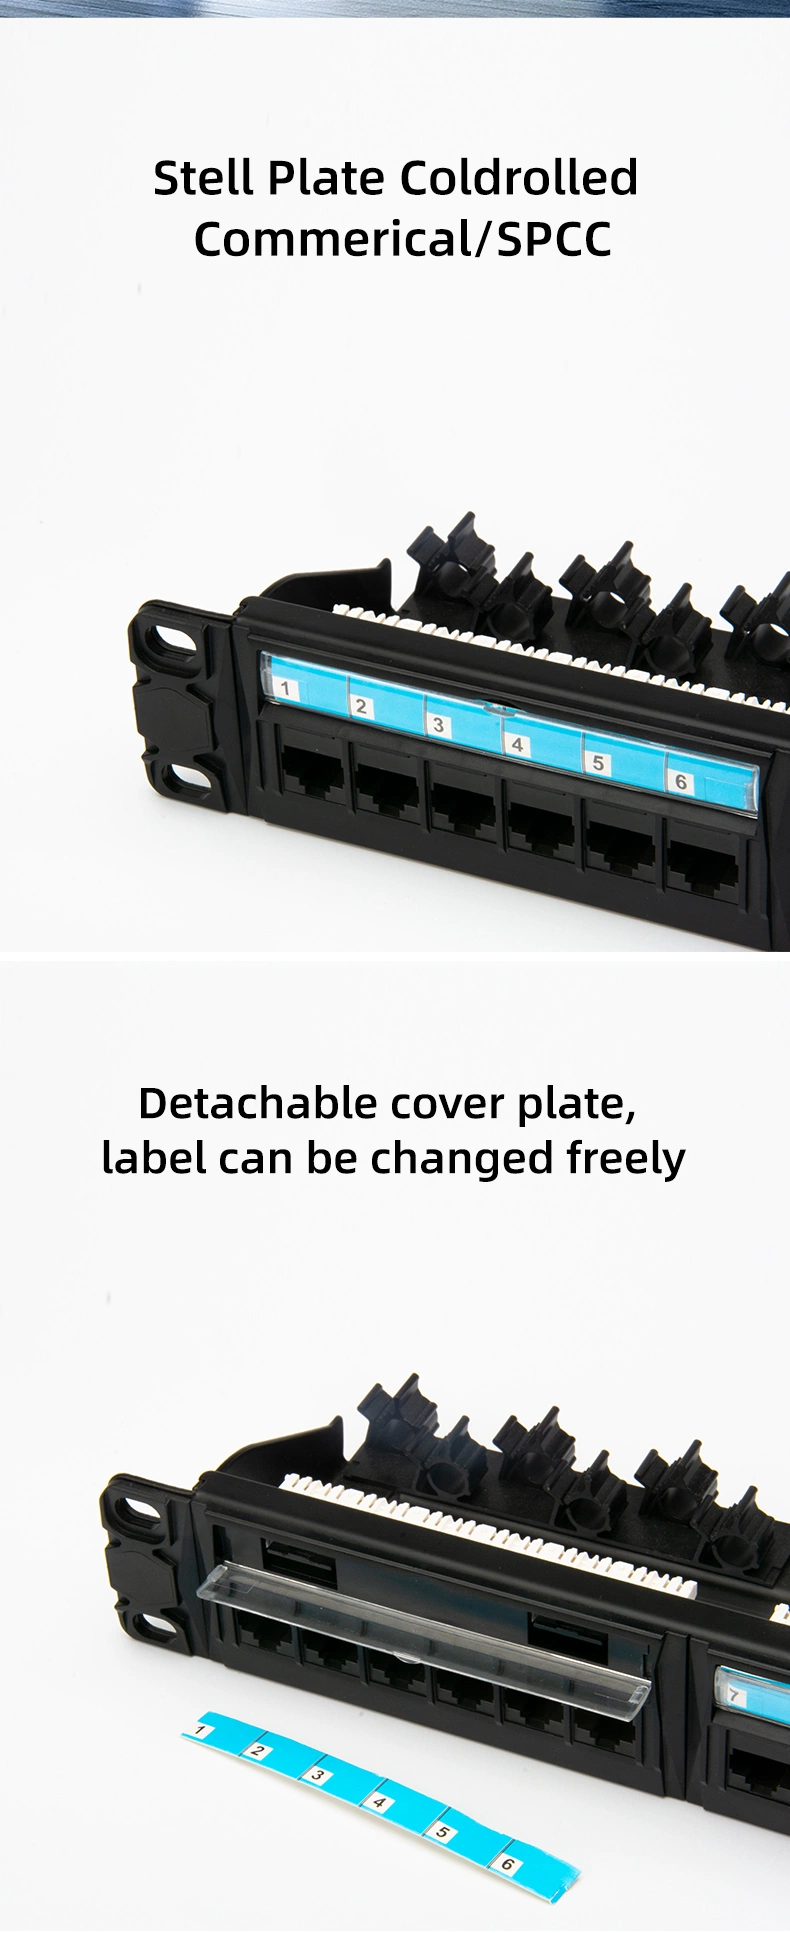 Network Patch Panel UTP Cat5e 24 Port Removable Port Patch Panel with Tie Free